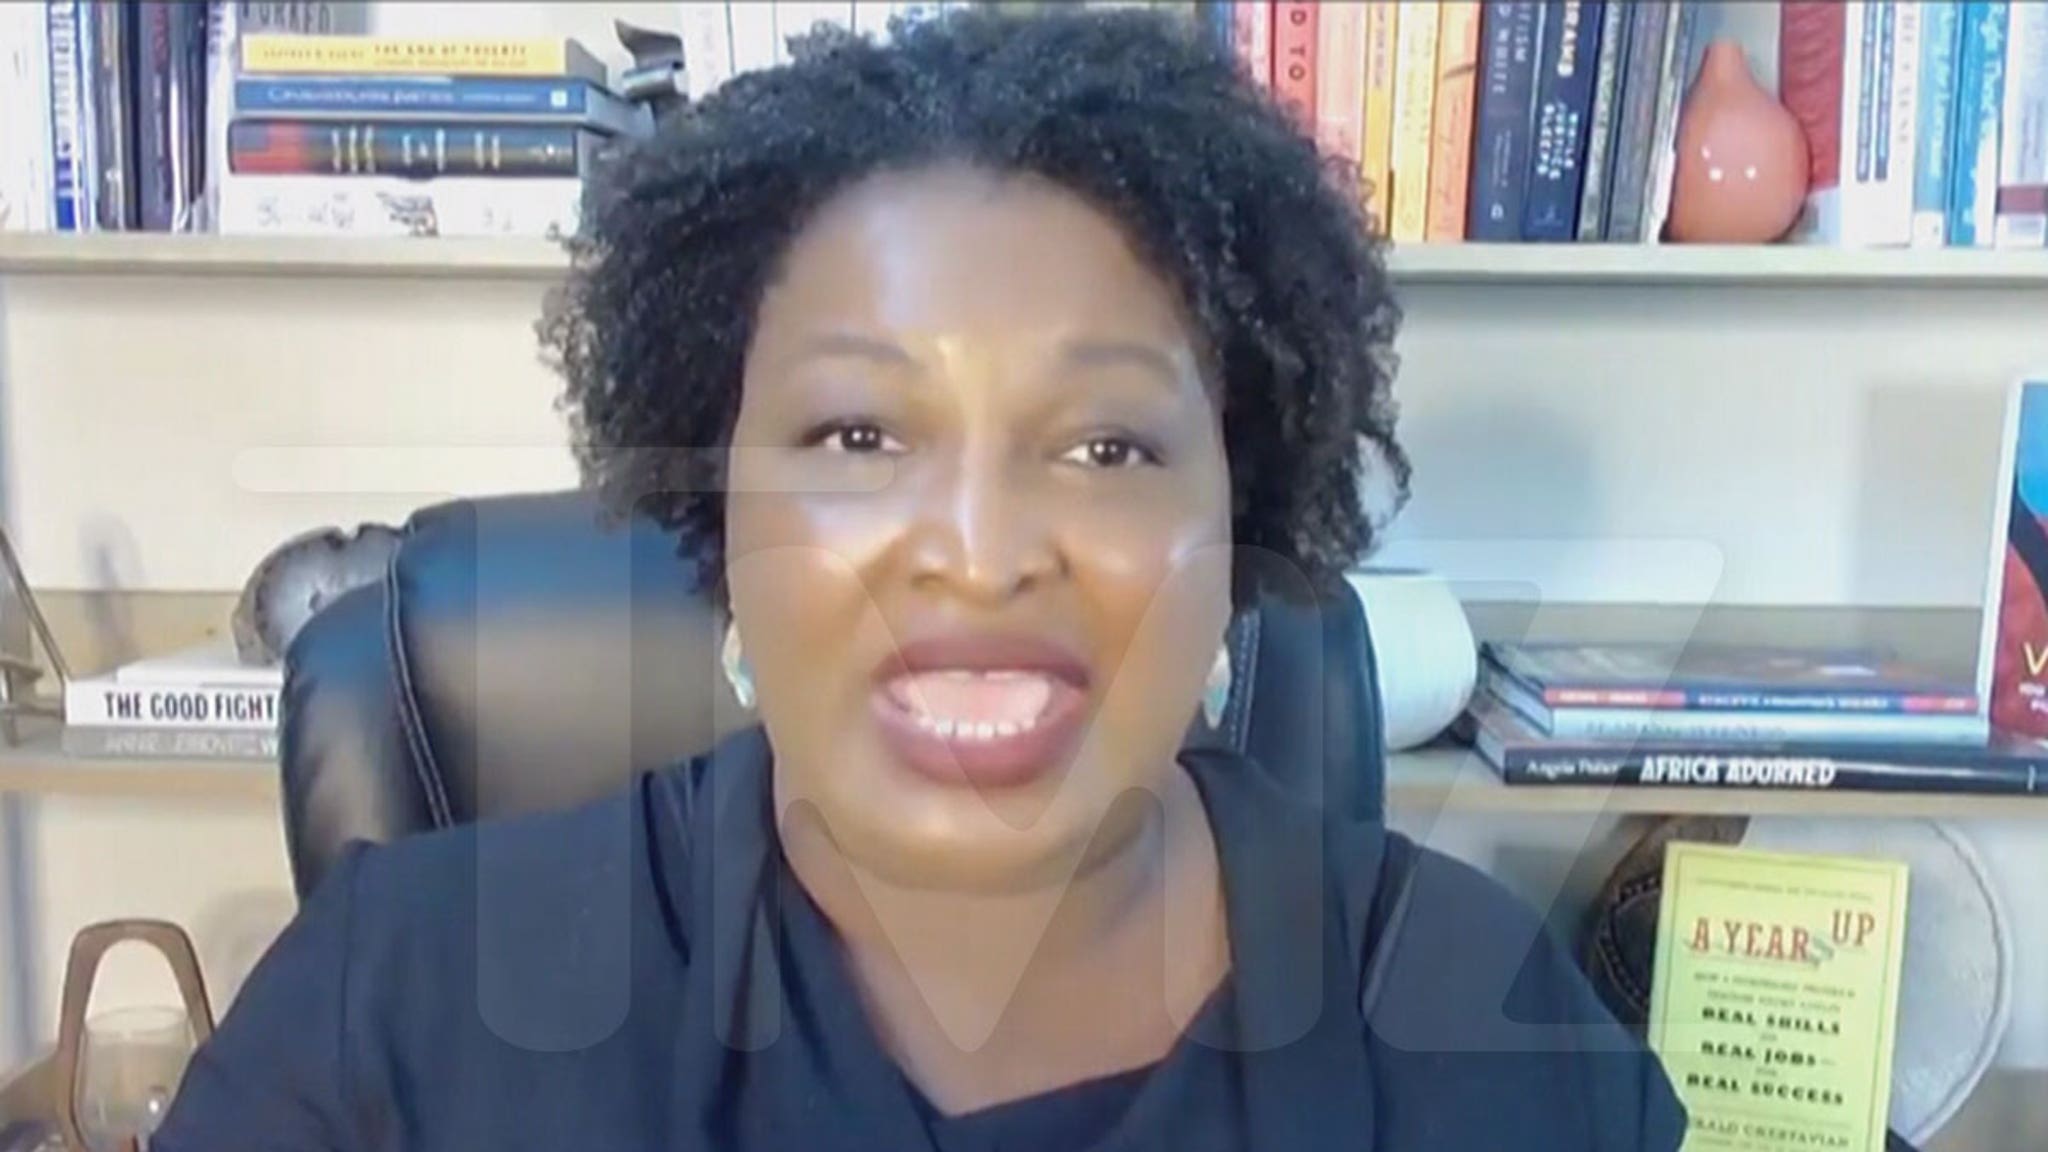 Stacey Abrams says voter suppression rigs election results and crushes democracy